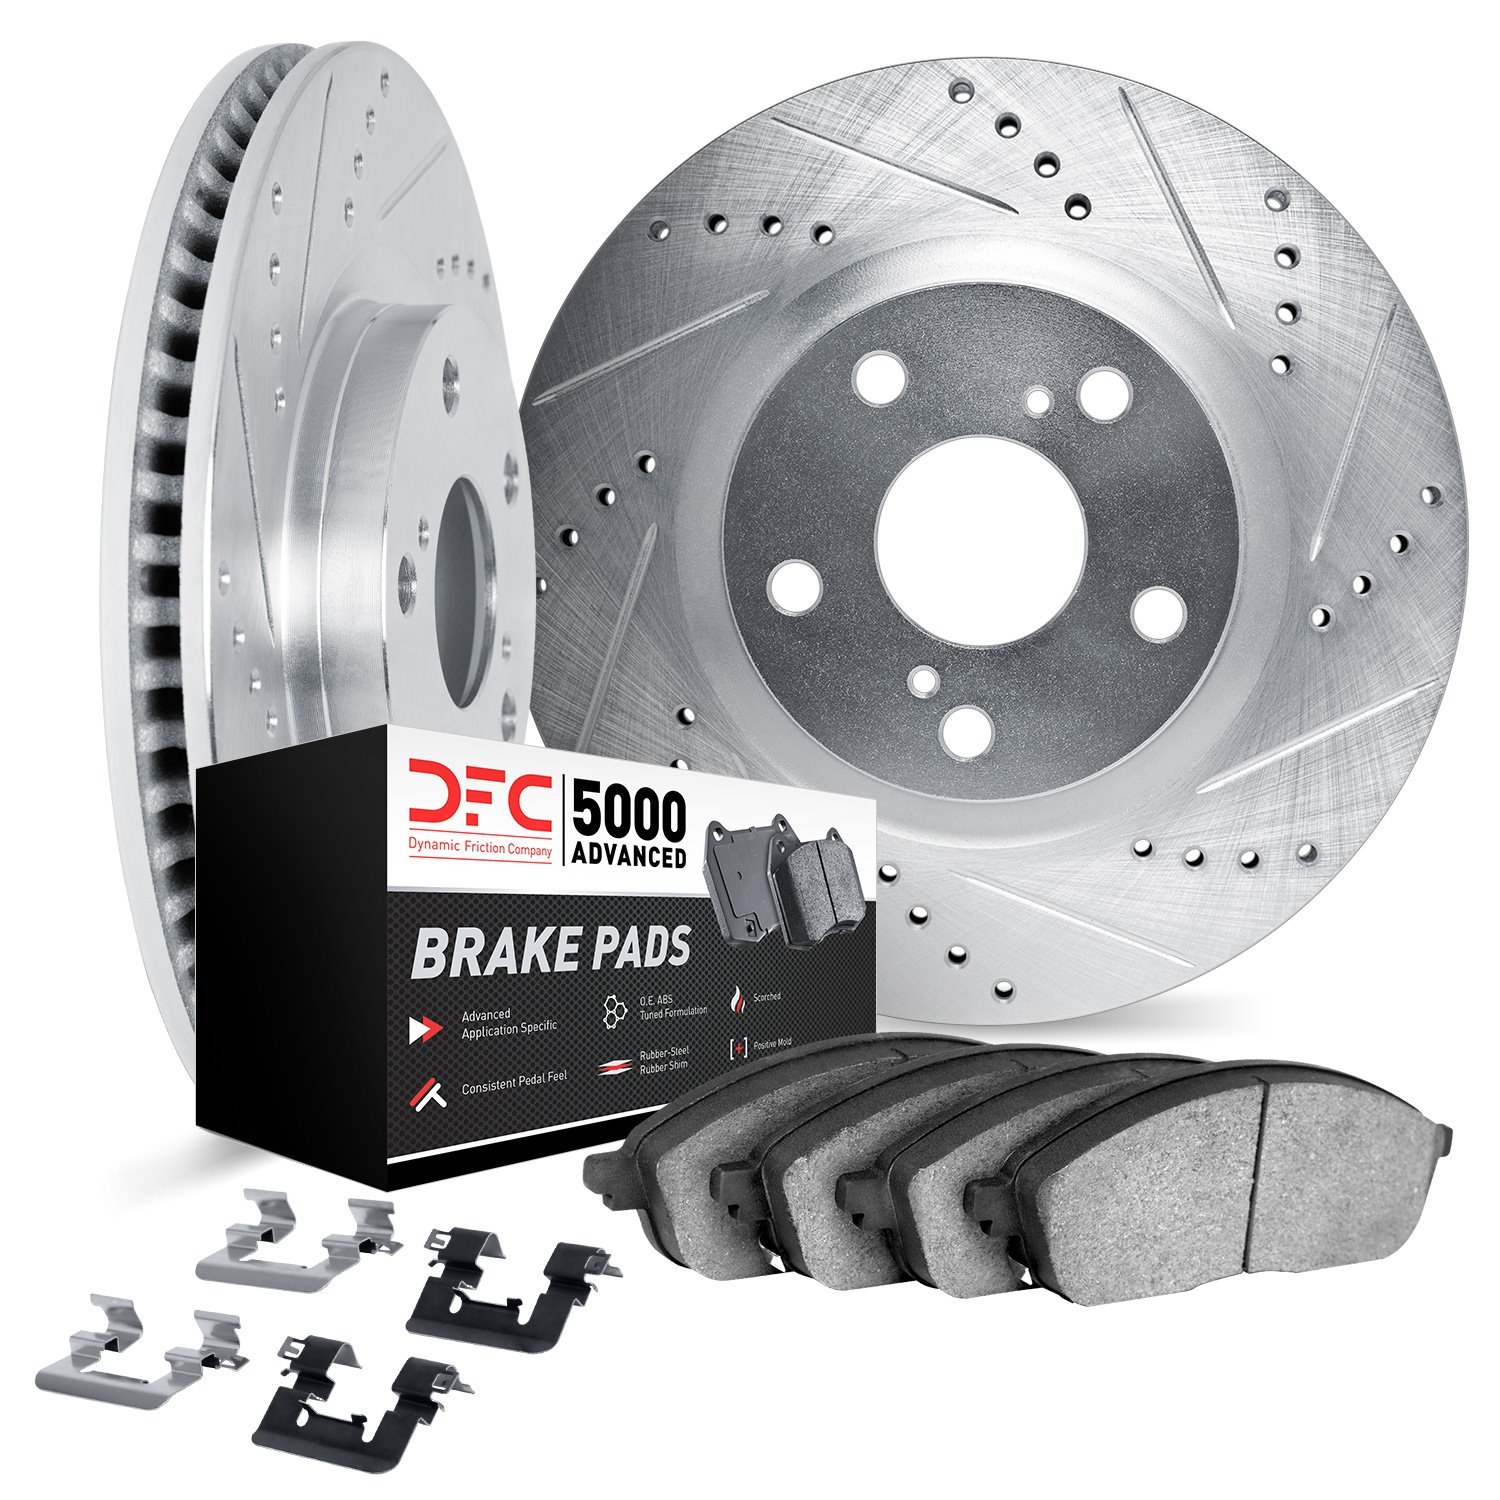 7512-73096 Drilled/Slotted Brake Rotors w/5000 Advanced Brake Pads Kit & Hardware [Silver], Fits Select Audi/Volkswagen, Positio